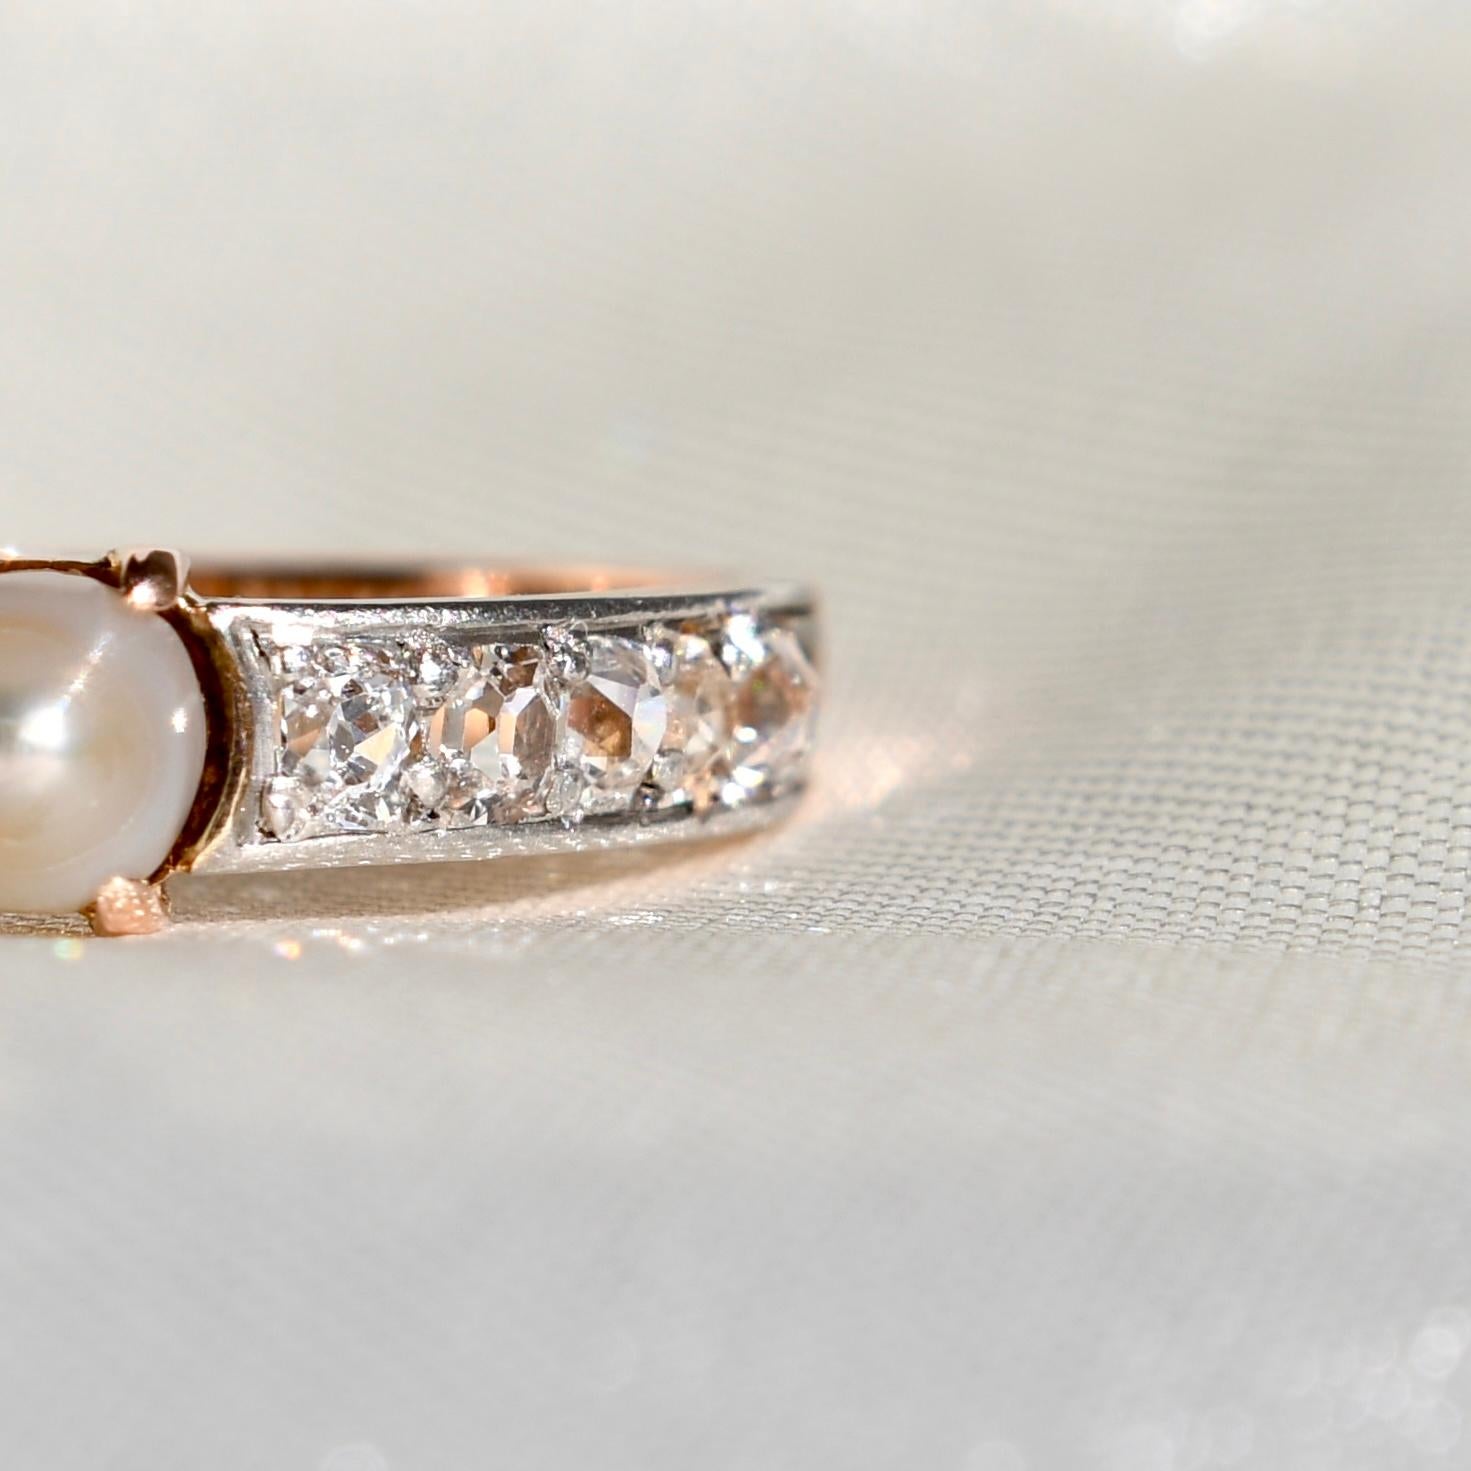 This ring was made in France circa 1900 and is in good, antique condition. 

- One pearl, 4.5x4.5 mm 
- Ten old mine cut diamonds, approx. 0.90 ct total 
- 750/ 18 ct yellow gold and platinum
- Ring size: EU 54, UK N, US 6 1/2 (Resizeable within